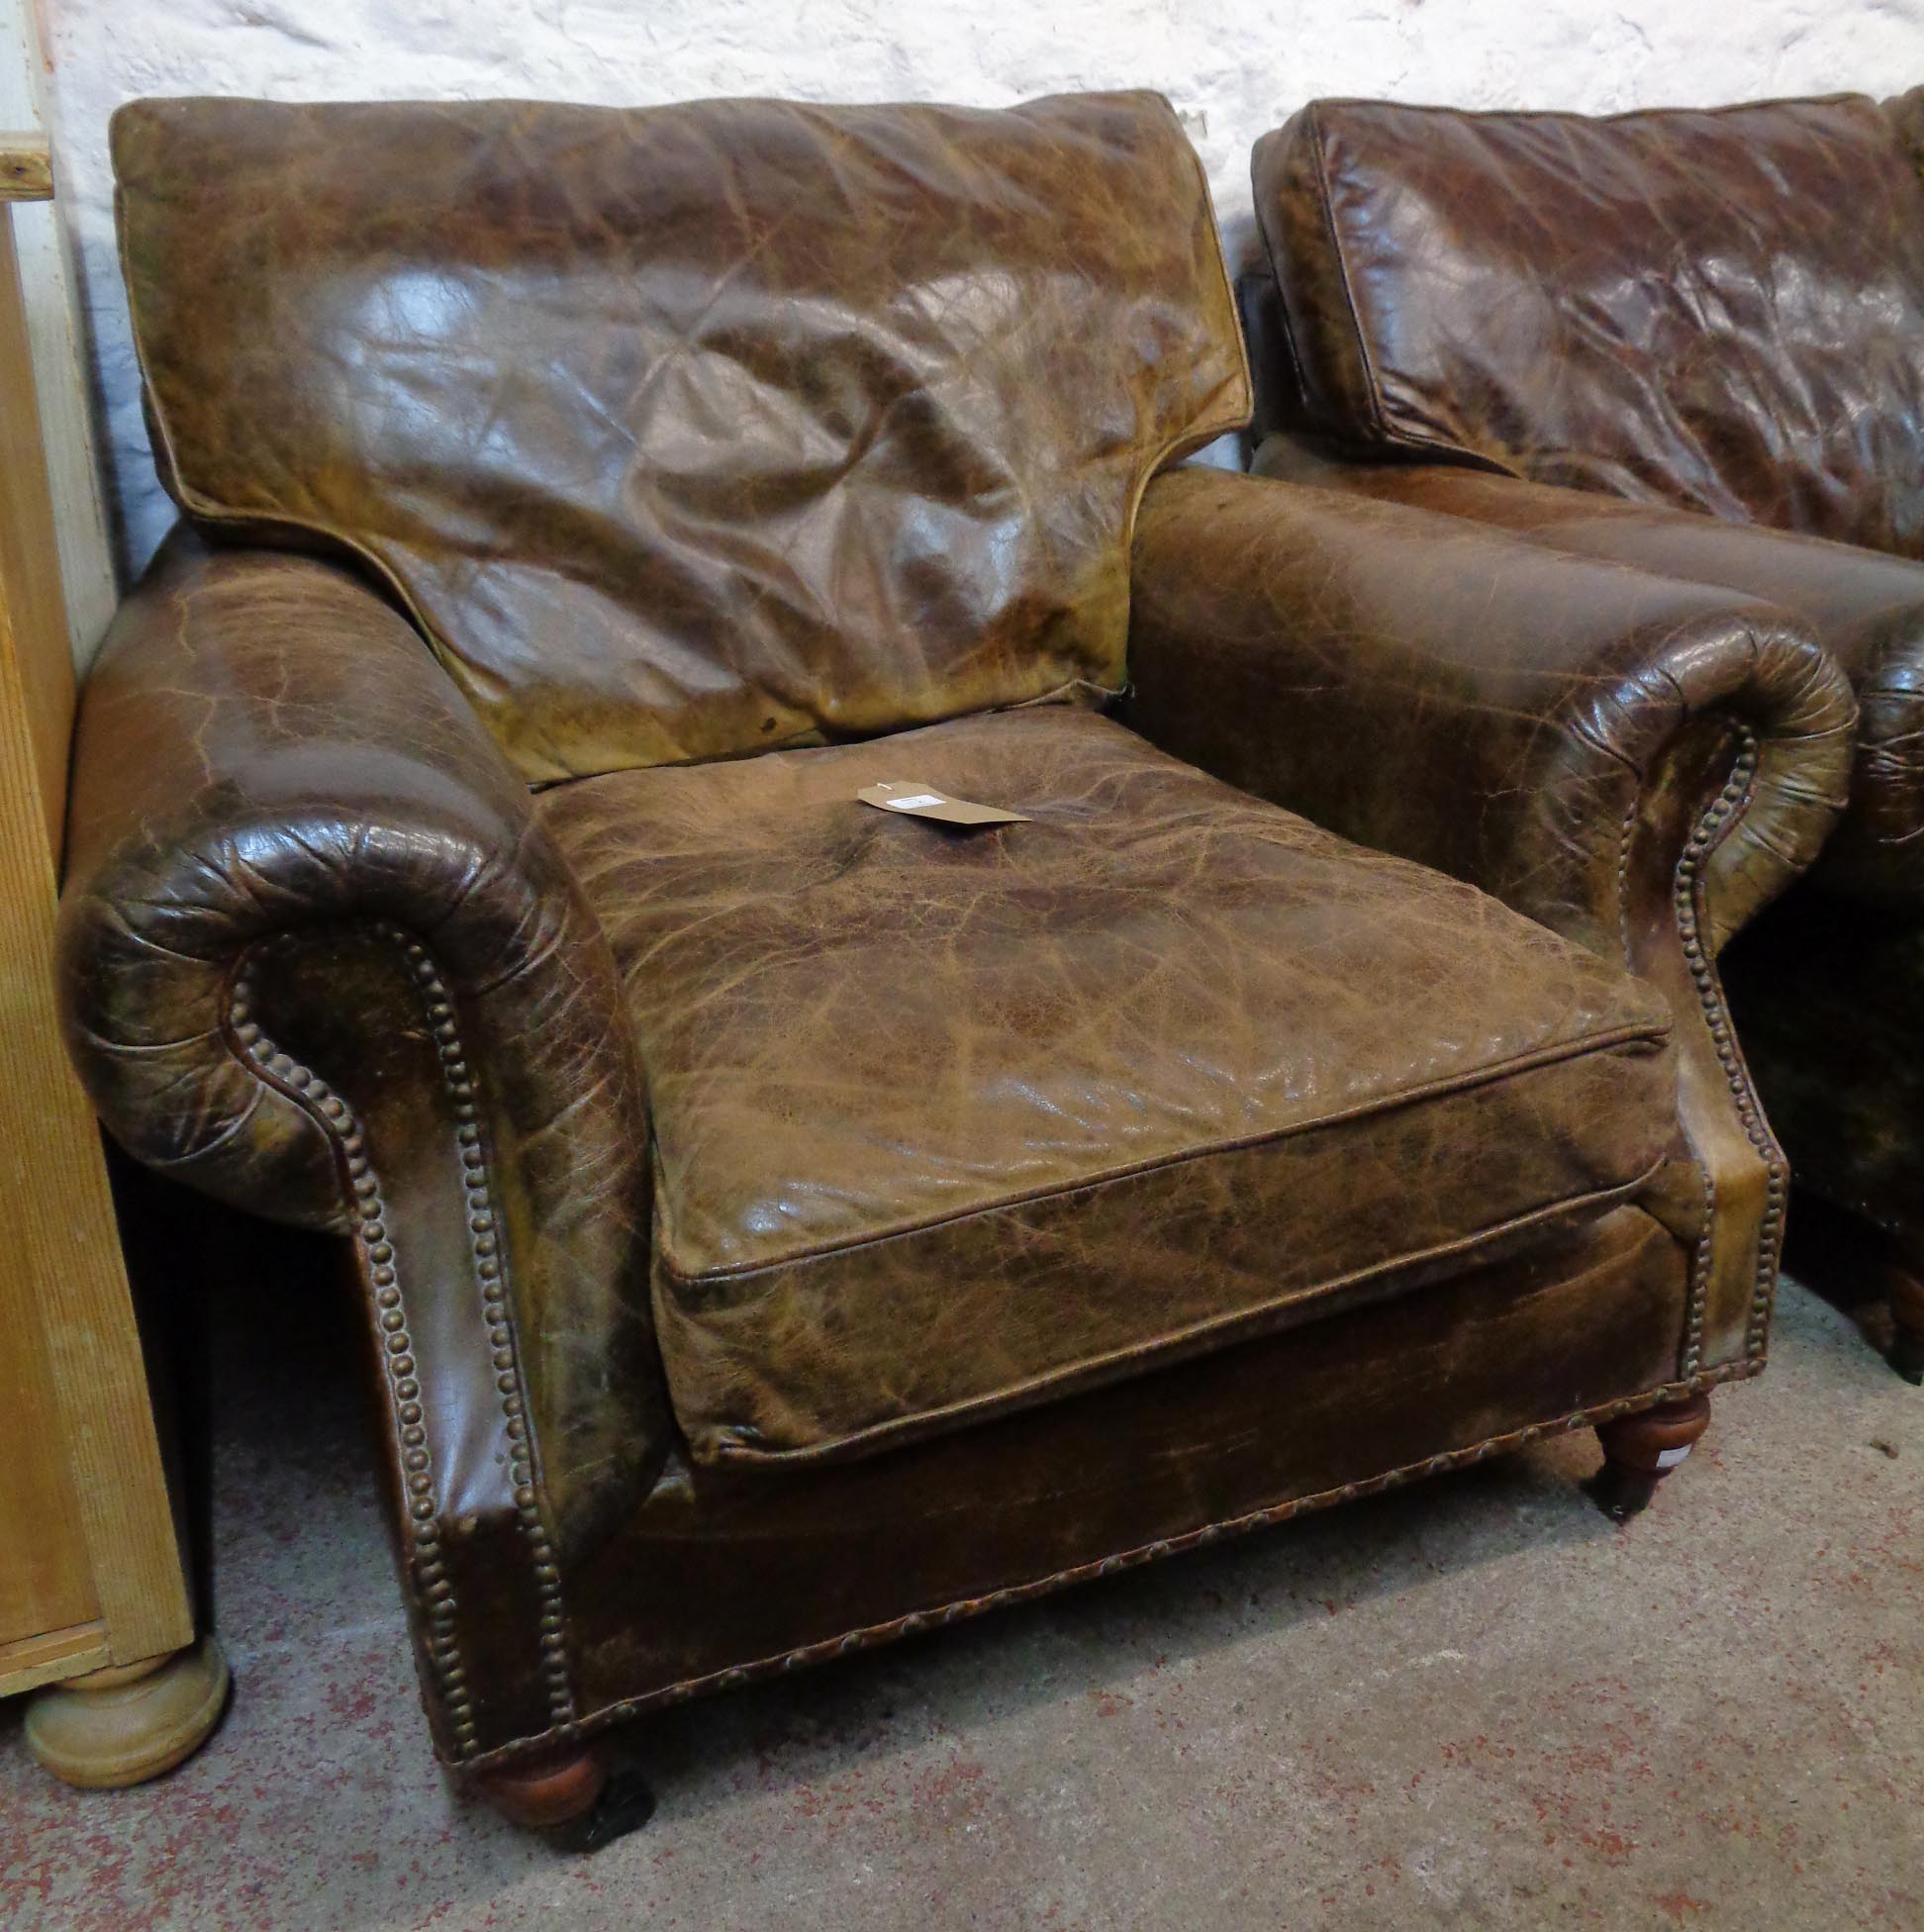 A 5' 8" studded brown leather upholstered two seater settee and armchair to match - the settee - Image 2 of 2